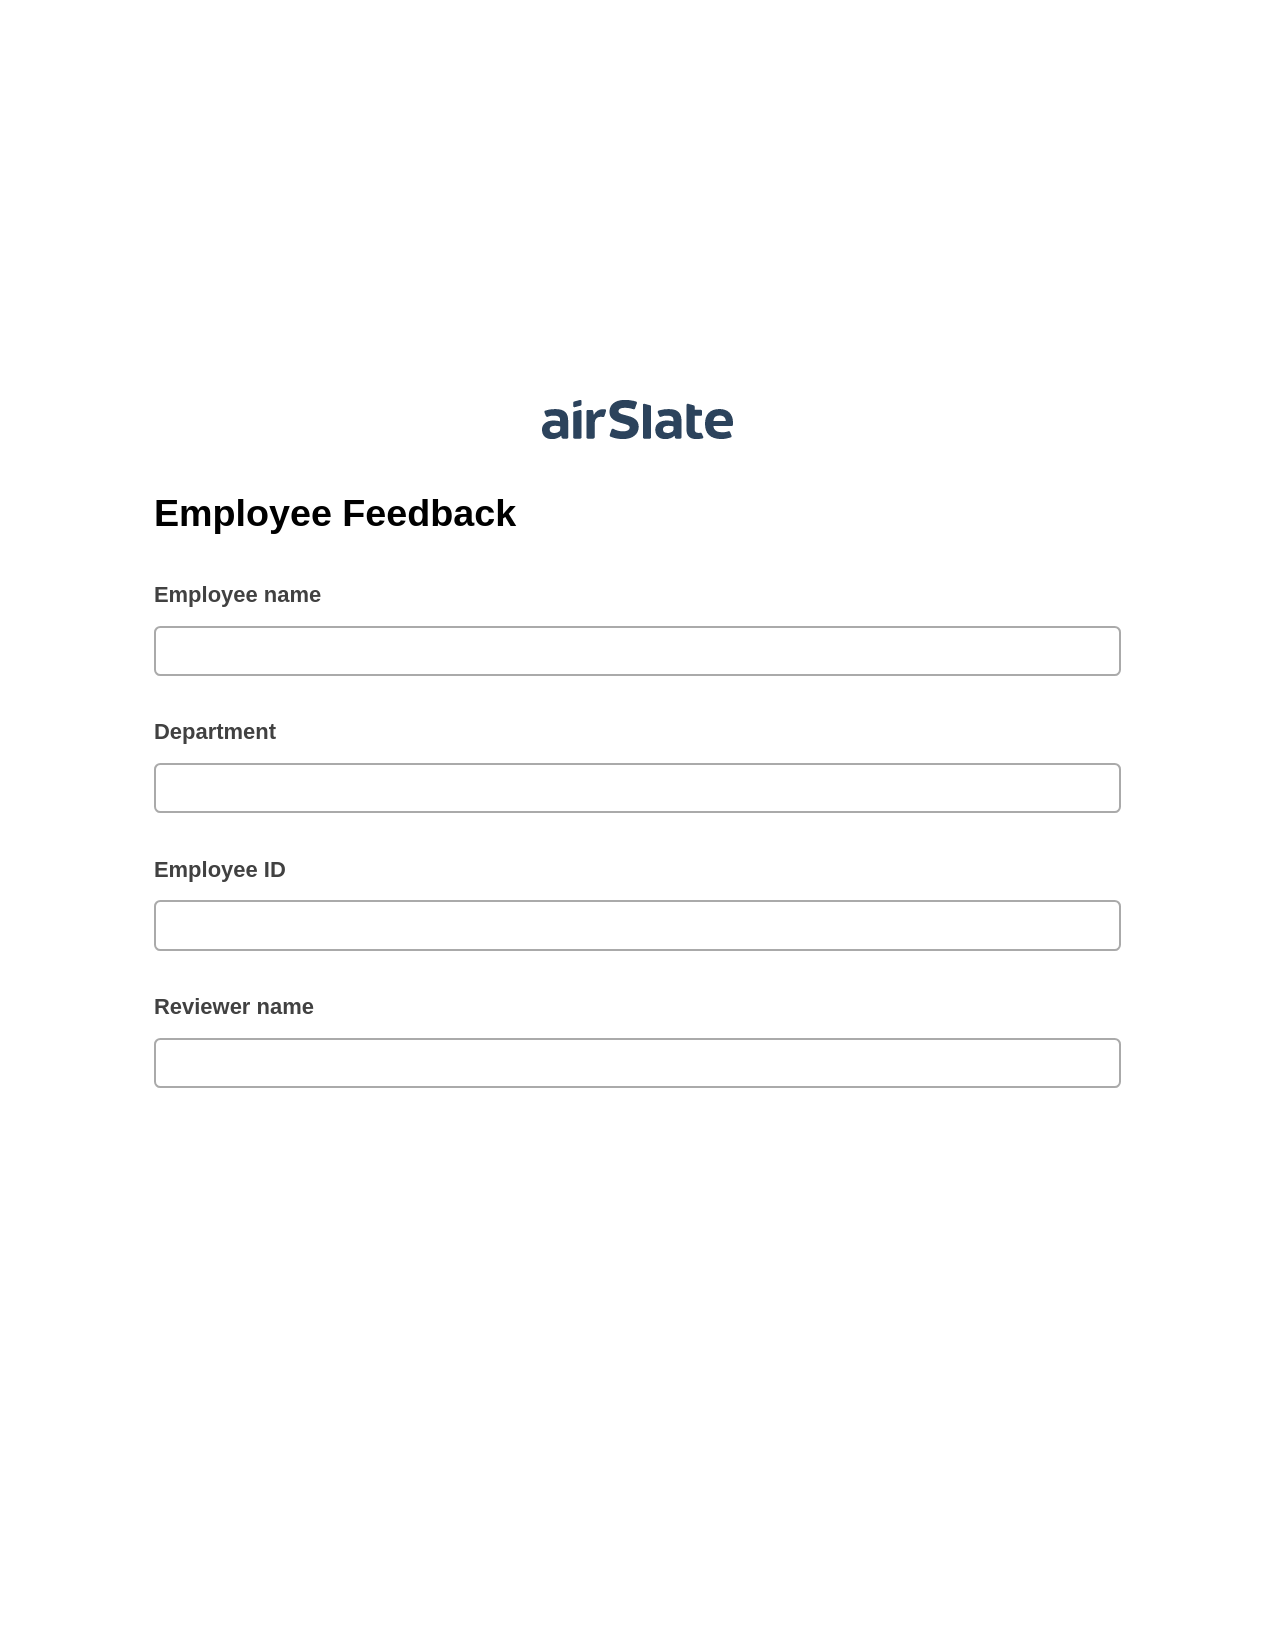 Employee Feedback Pre-fill from CSV File Bot, Roles Reminder Bot, Export to Smartsheet